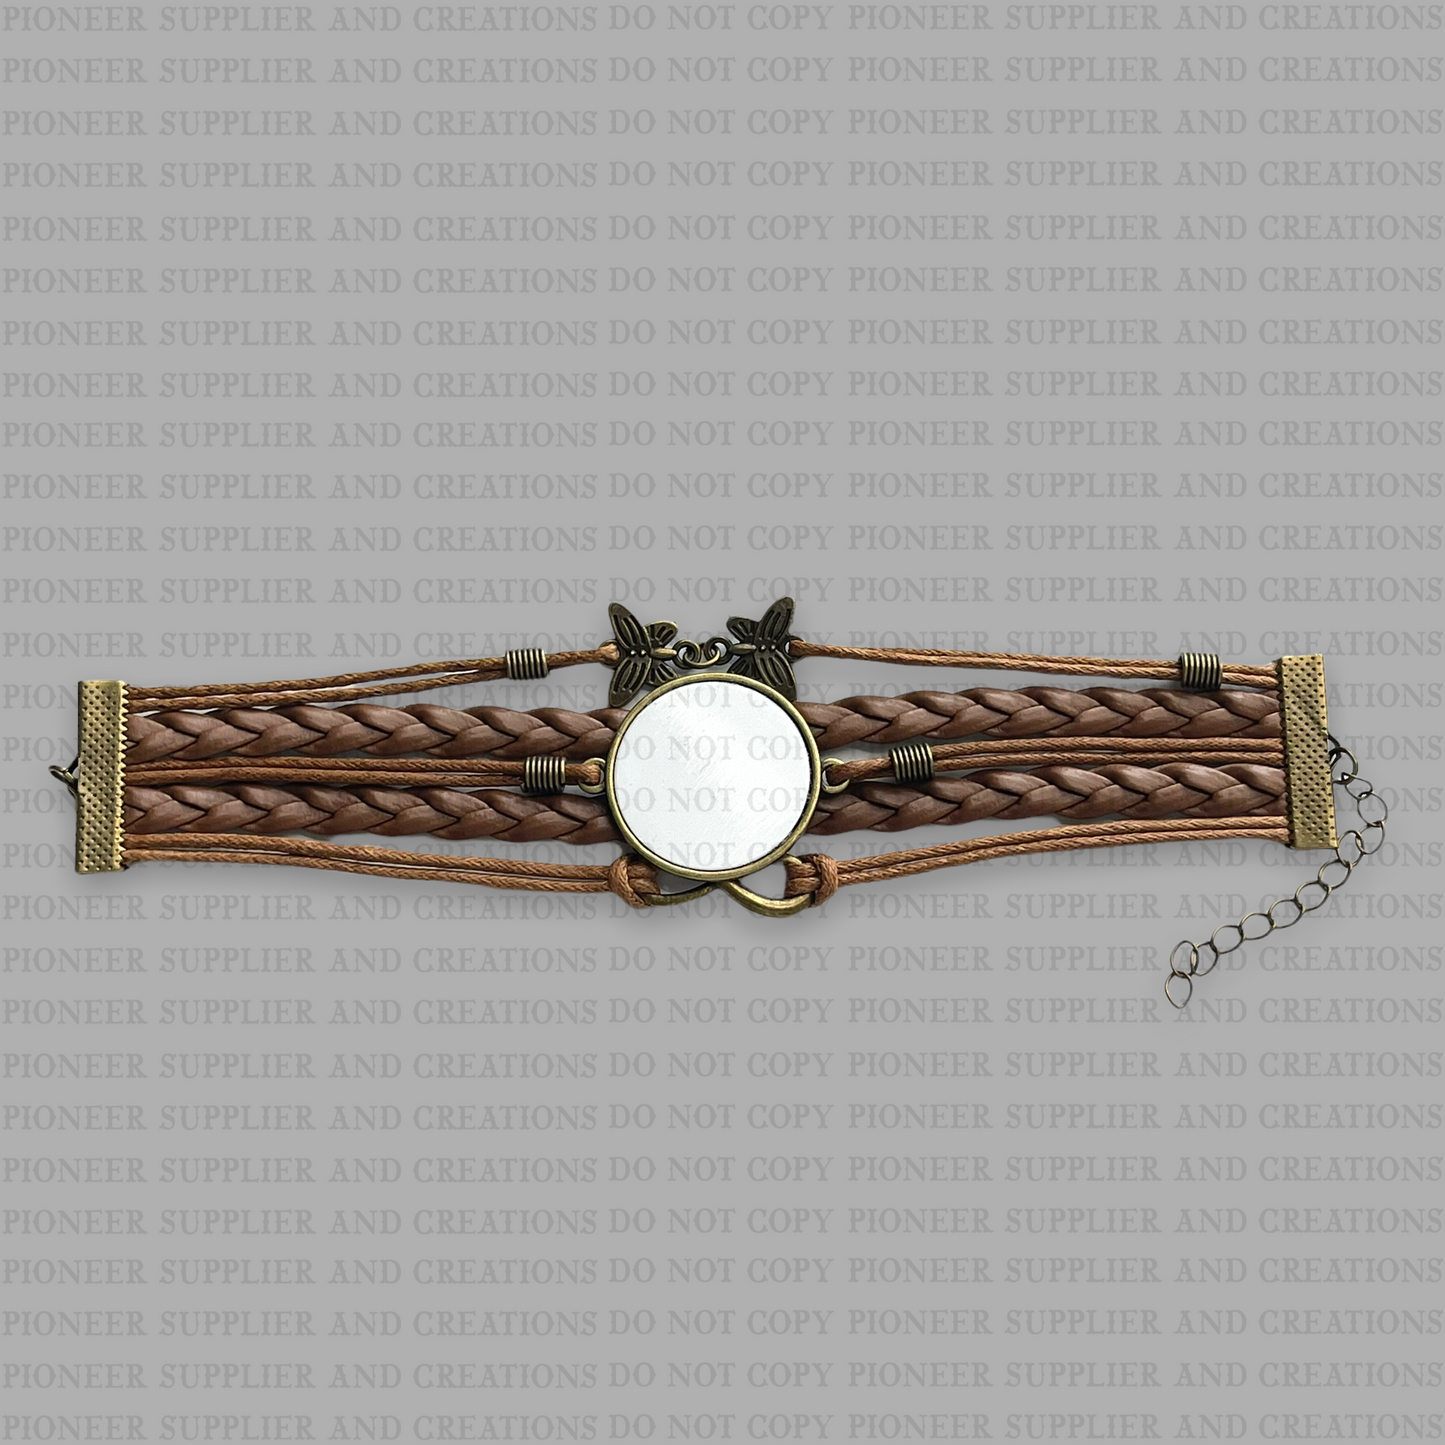 Brown Cuff Bracelet Sublimation Blank - Pioneer Supplier & Creations